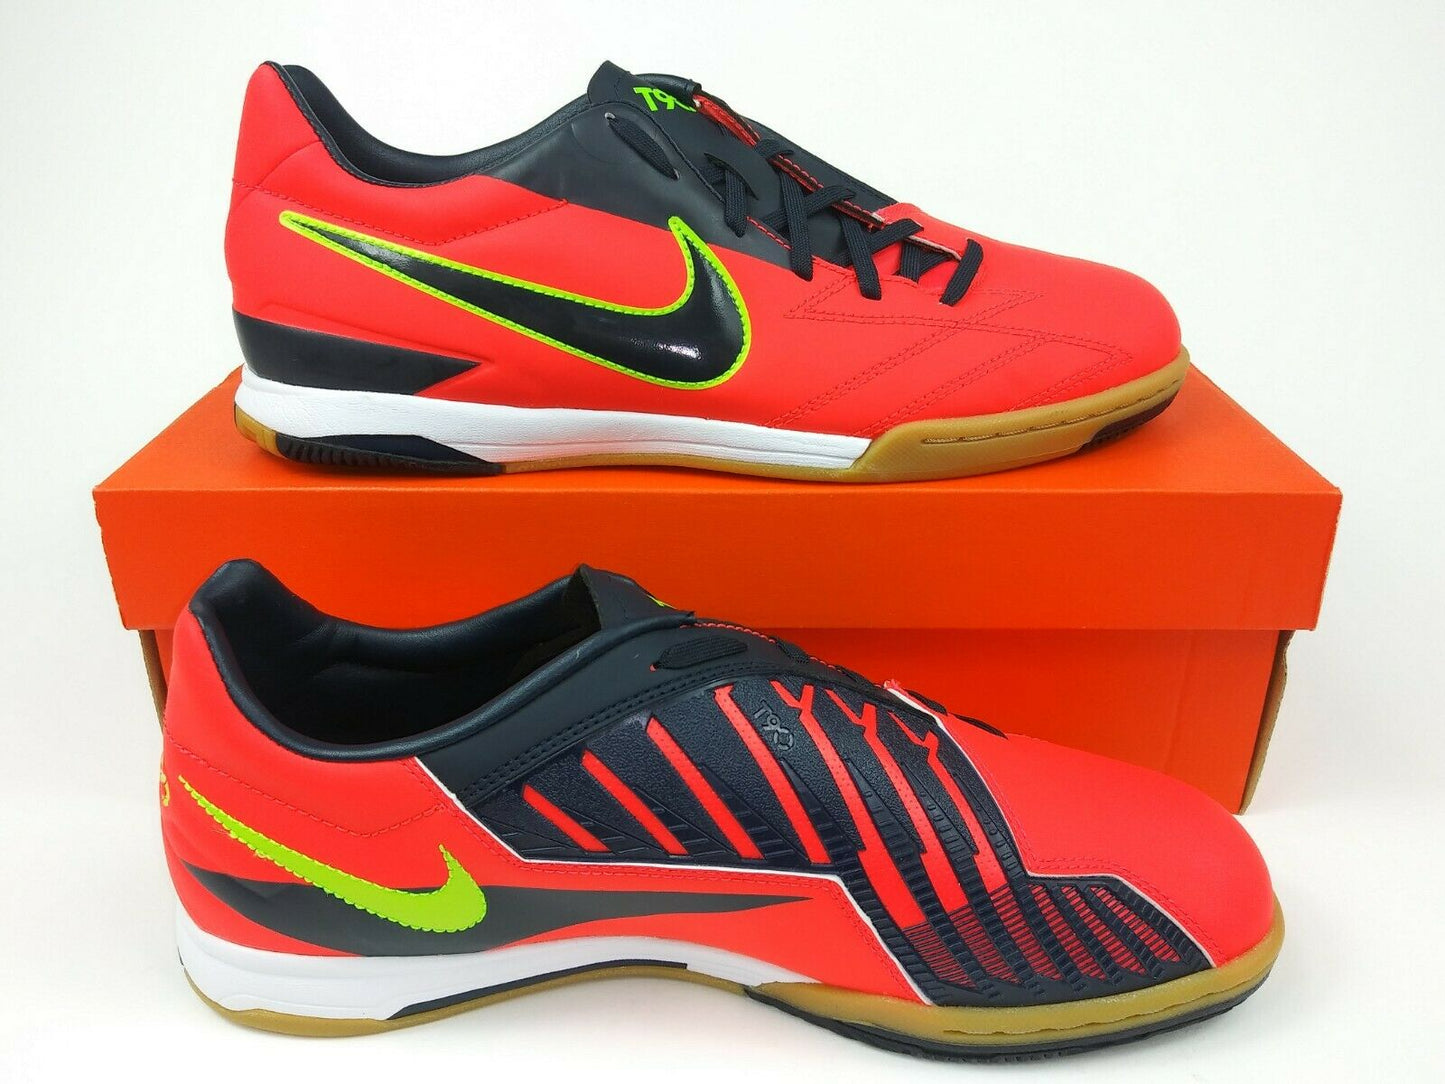 Nike T90 Shoot IV IC Indoor Shoes Pink